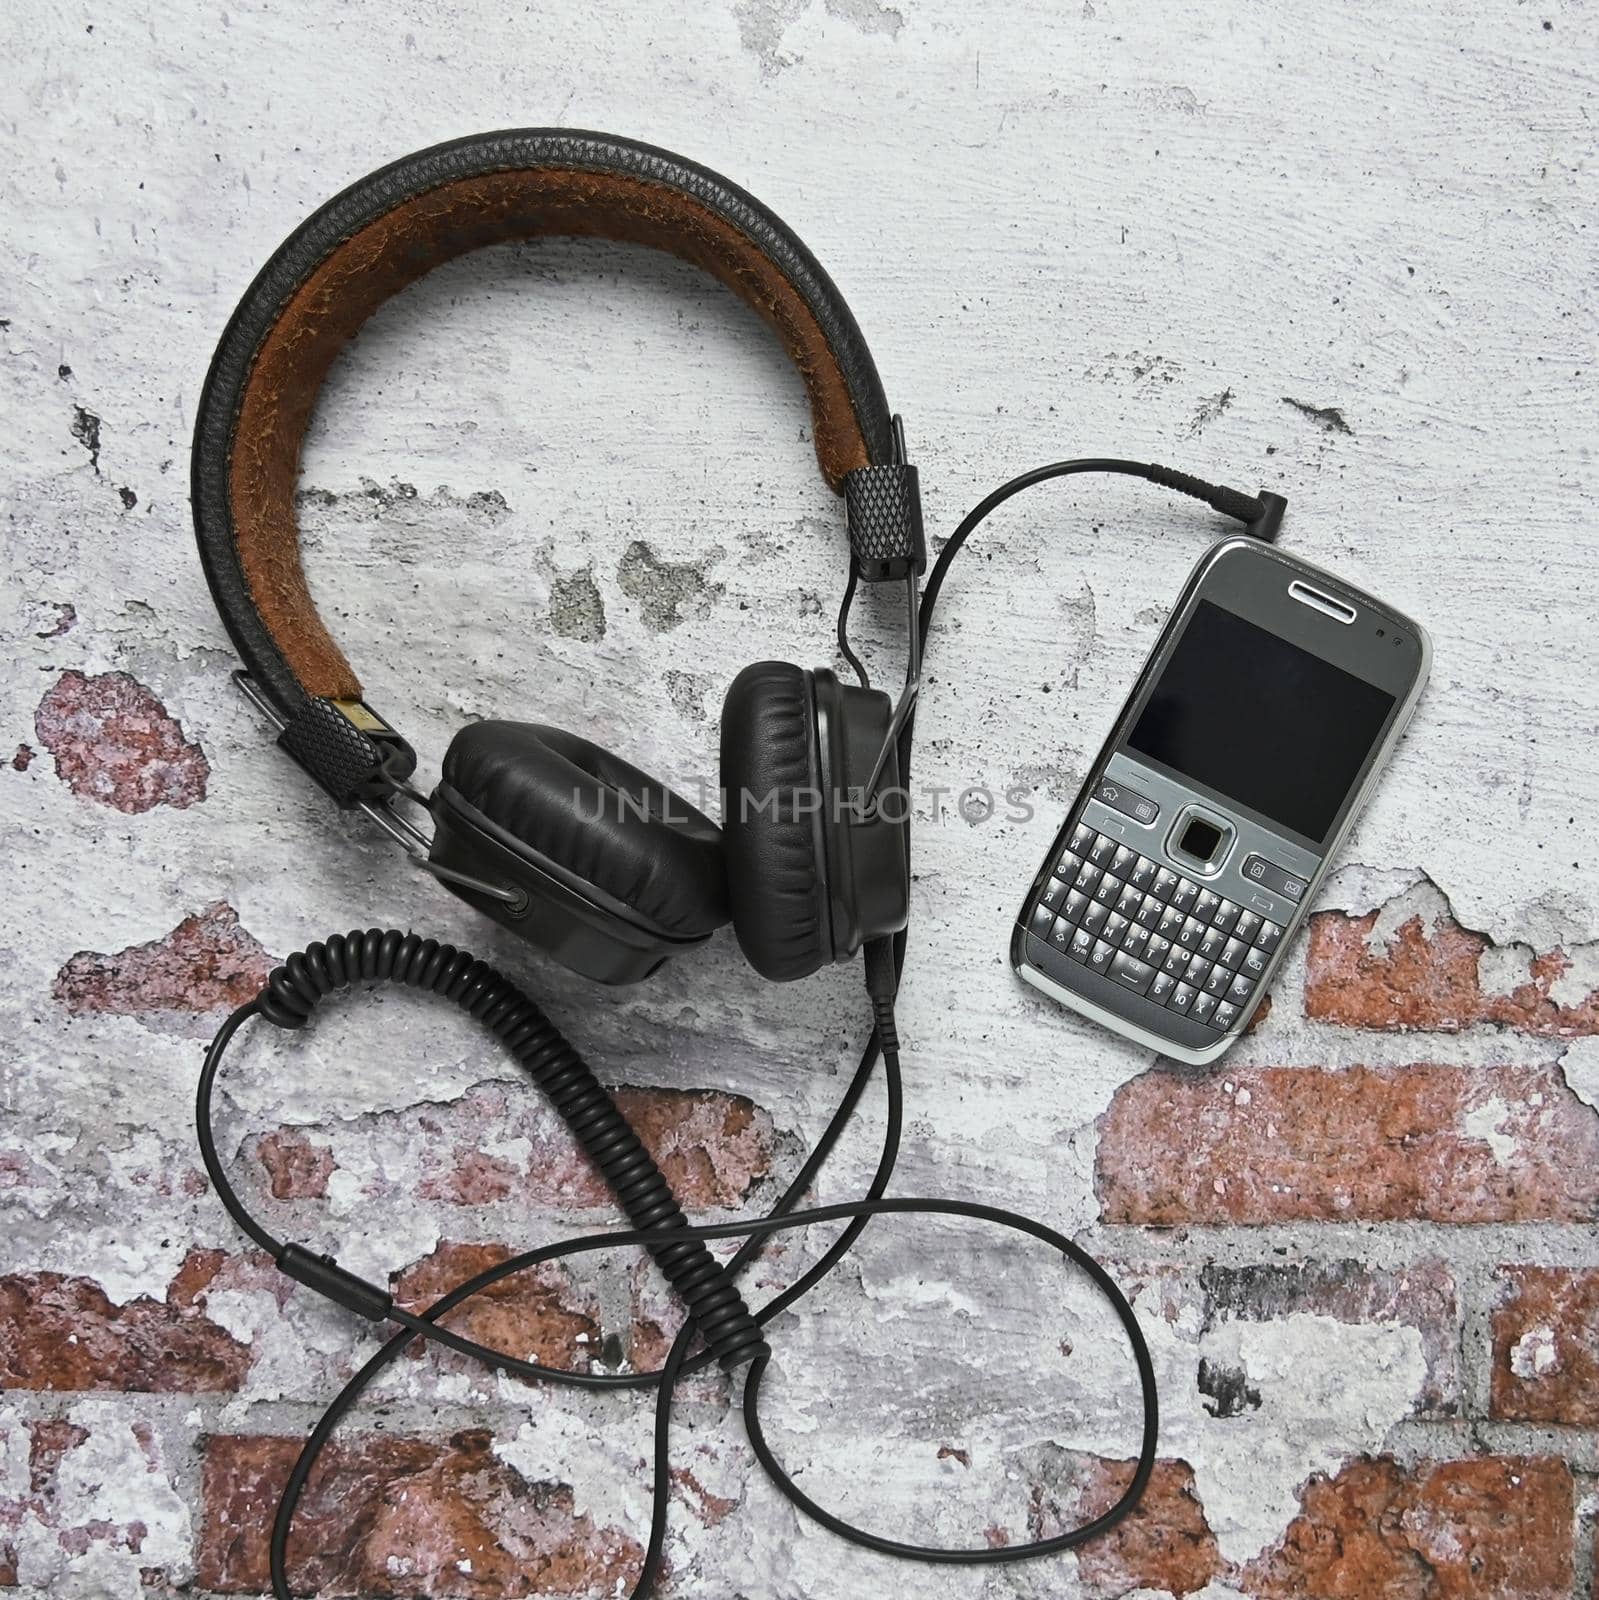 headphones with an old push-button phone lying on a brick wall by ISRAFOTO